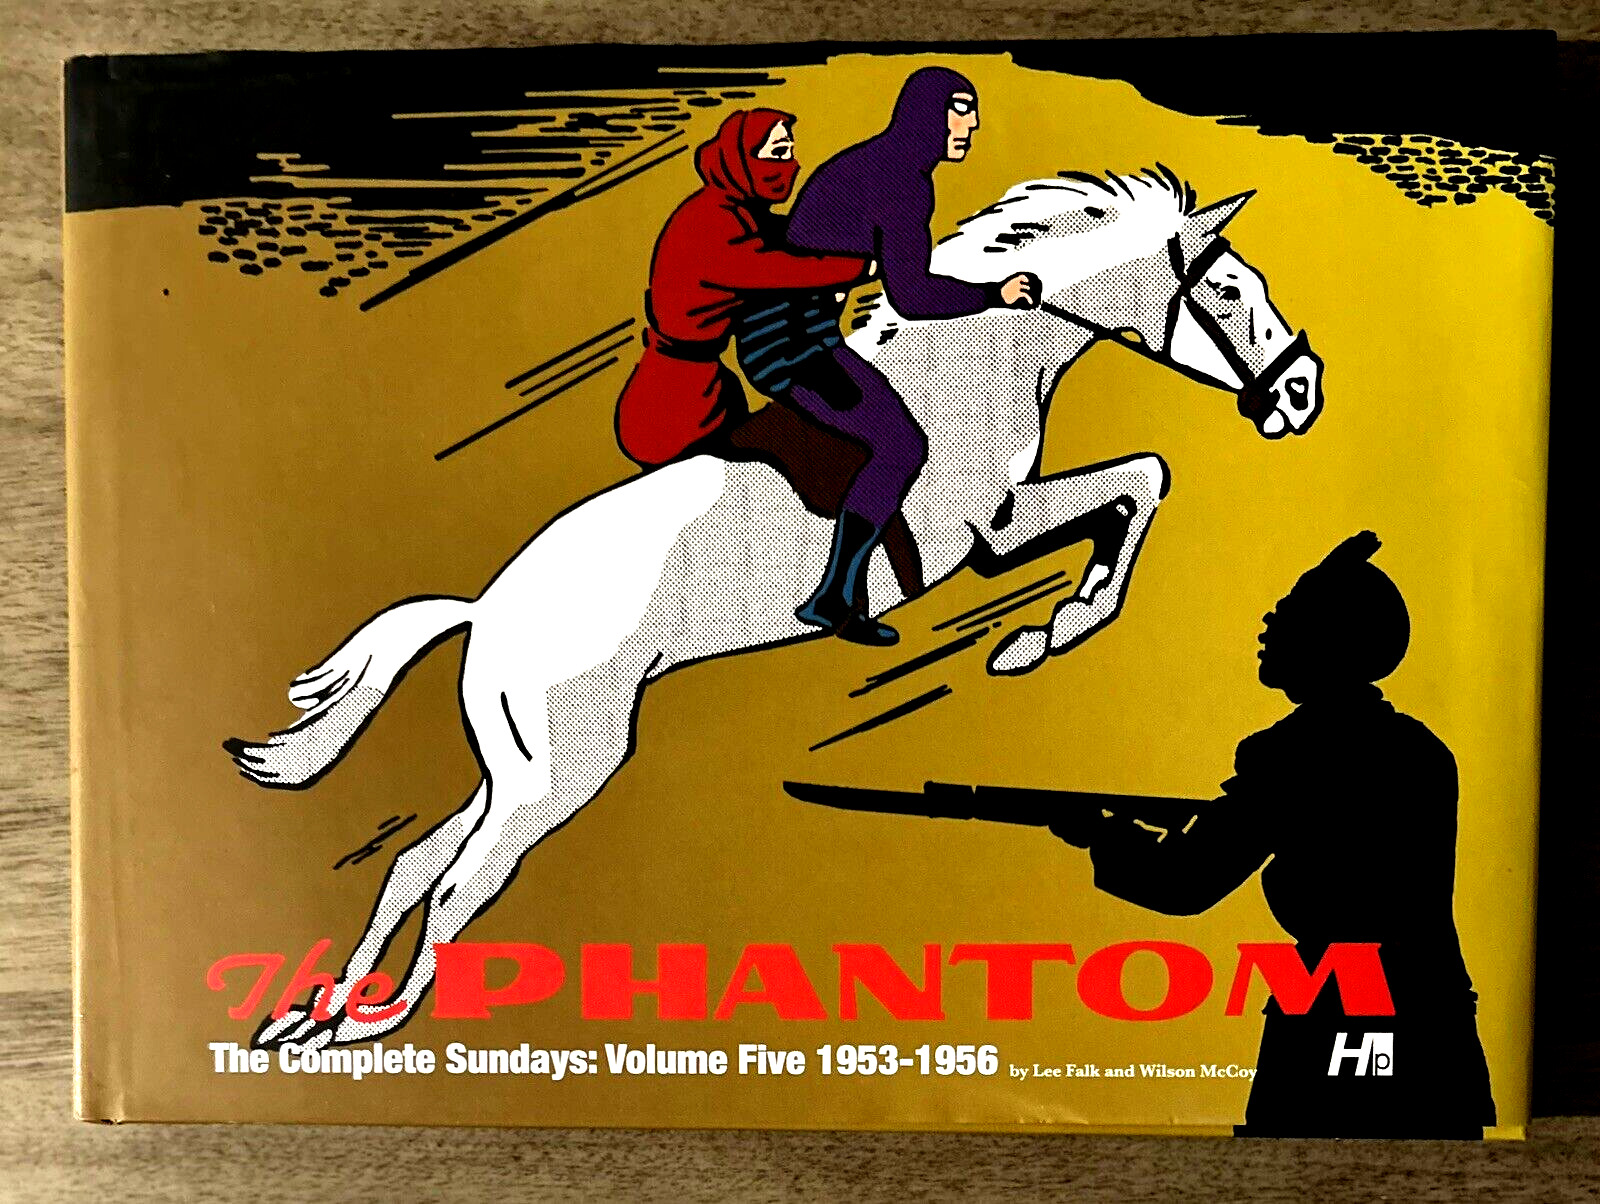 THE PHANTOM The Complete Sunday's: Volume Five 1953 HARDCOVER by Falk & McCoy